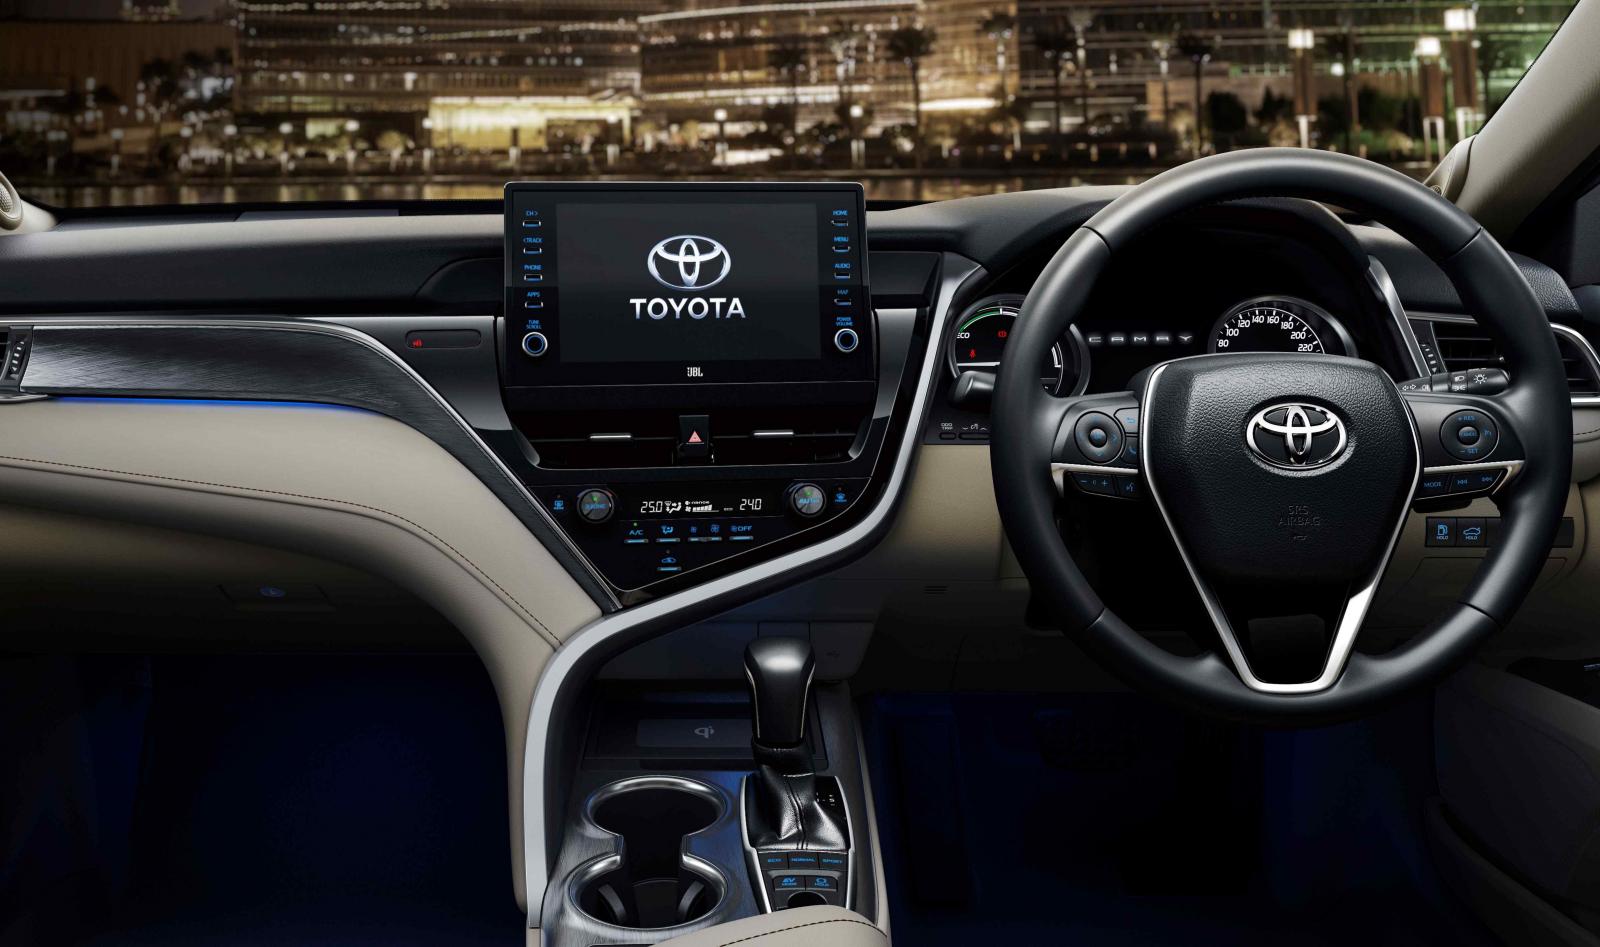 New Toyota Camry Hybrid Goes on Sale in India